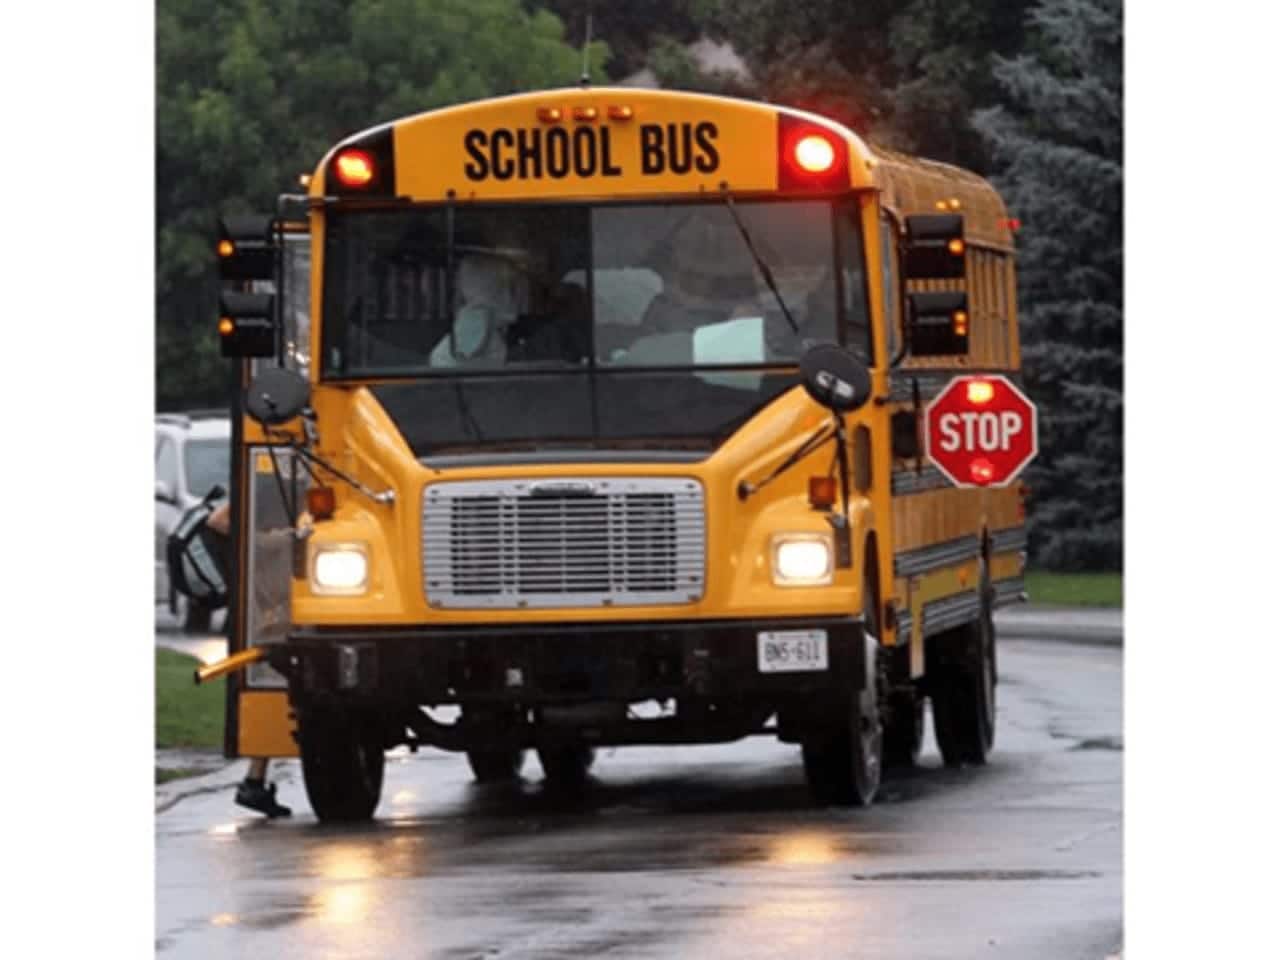 A school bus driver may lose her job over a mid-route bathroom break.